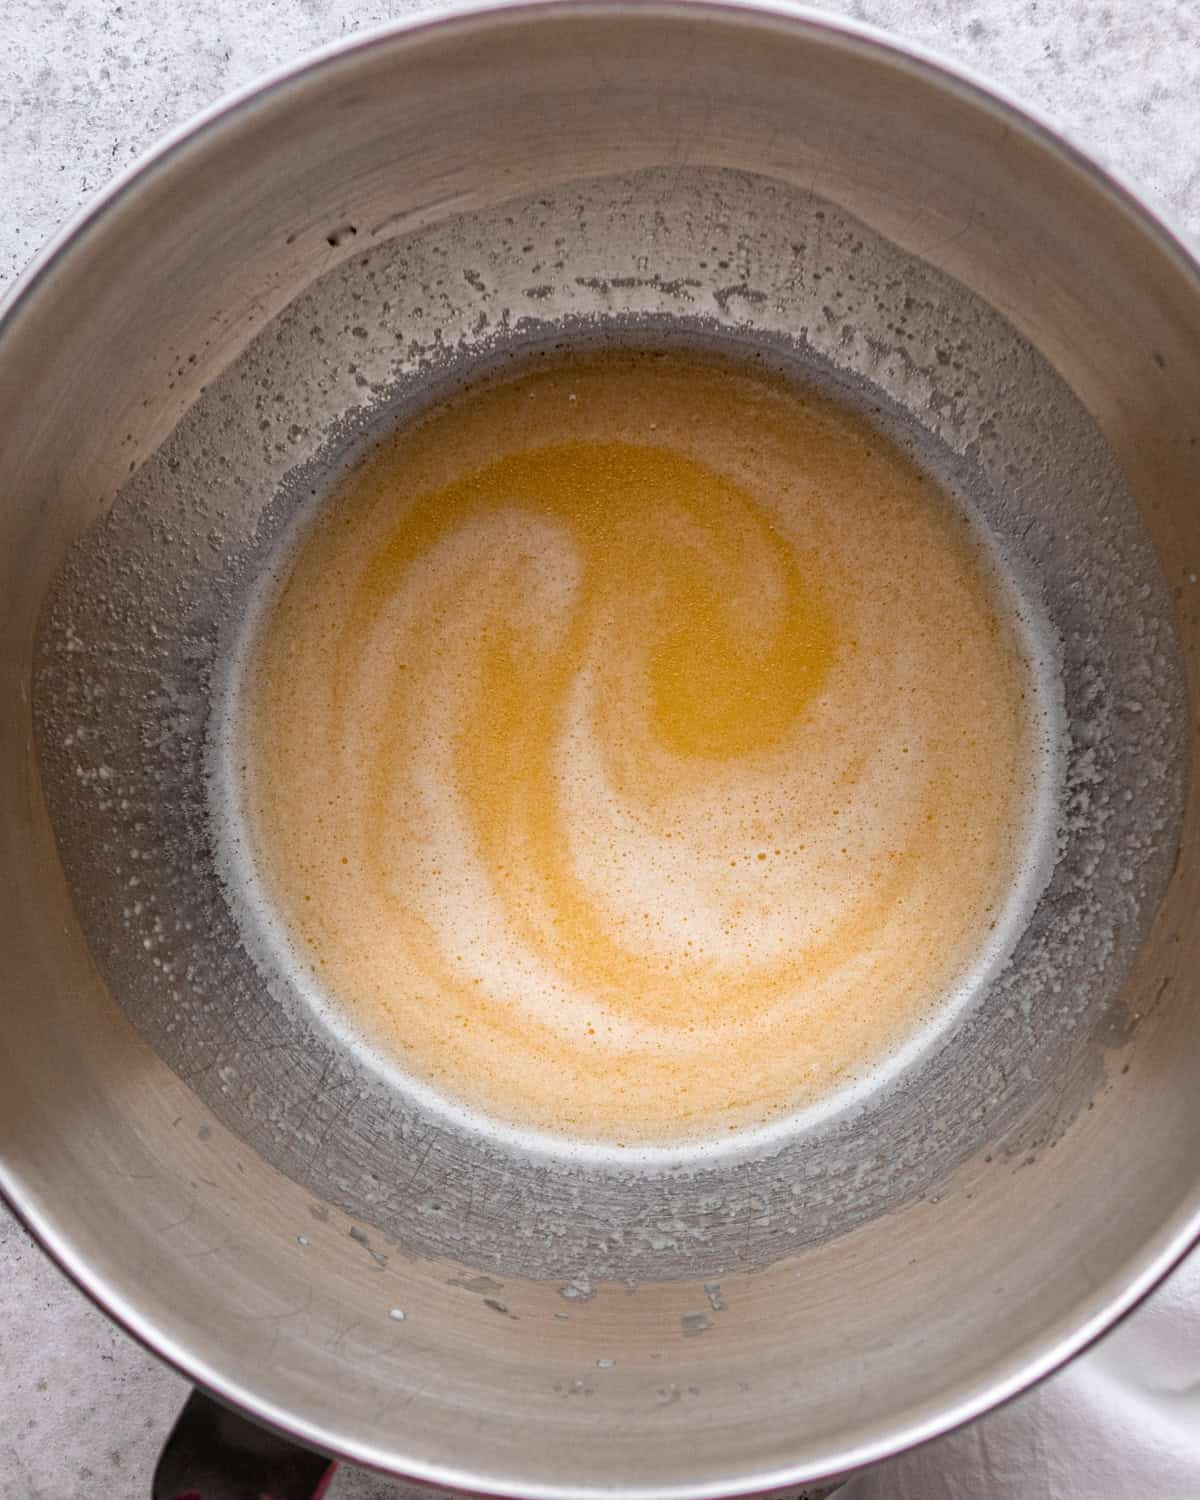 How to Make Pretzel Bread - wet ingredients added to proofed yeast after stirring